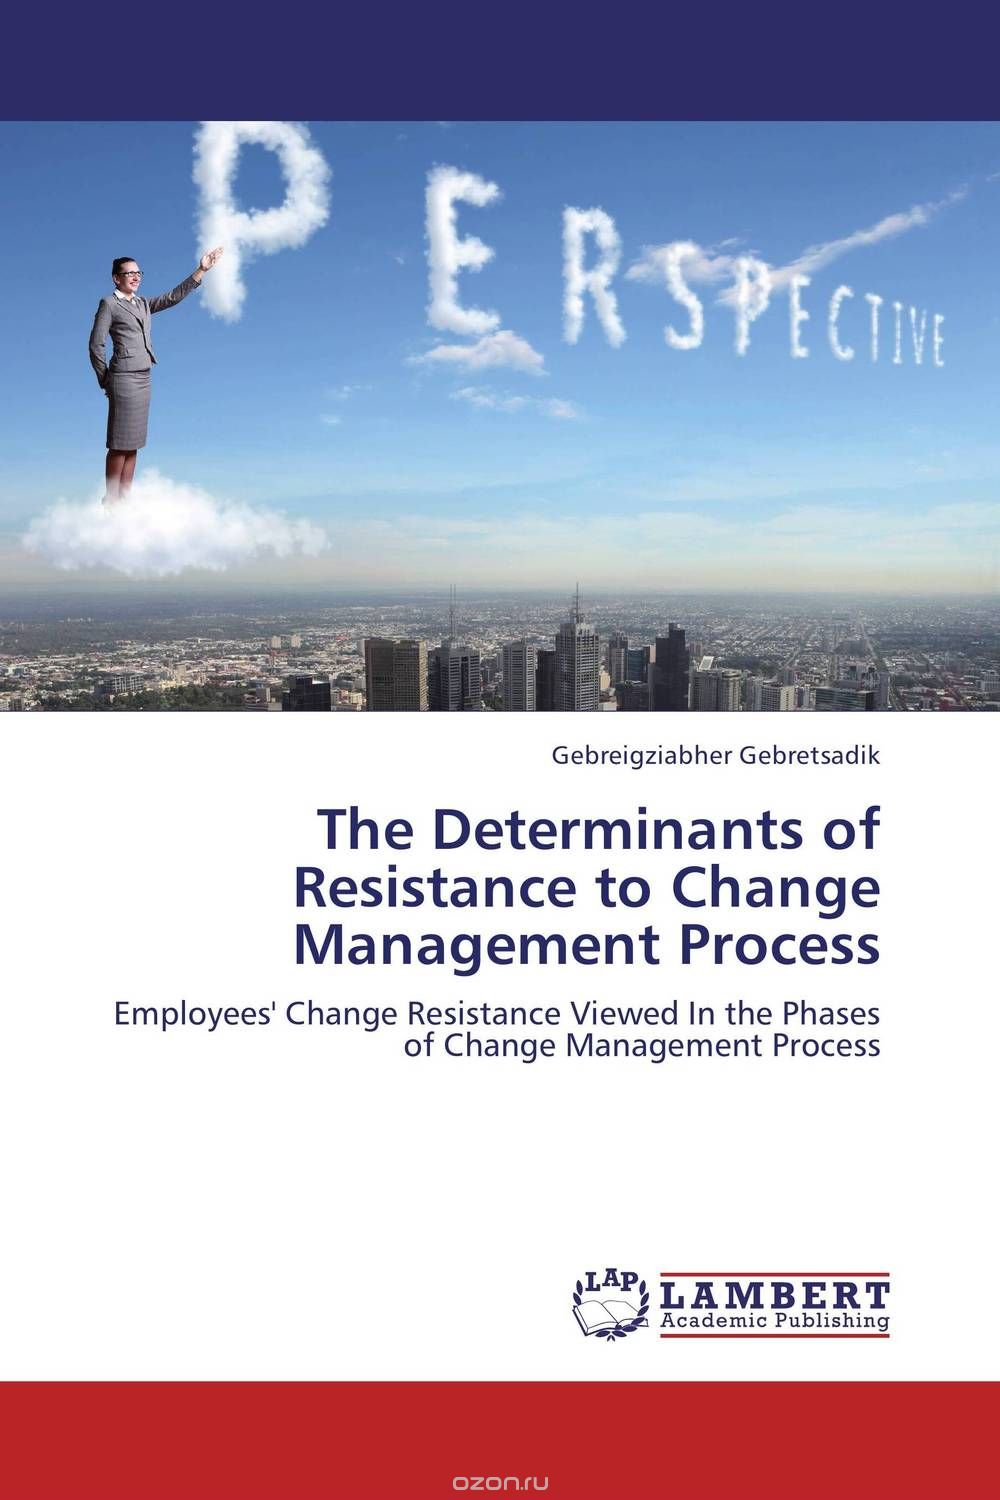 The Determinants of Resistance to Change Management Process